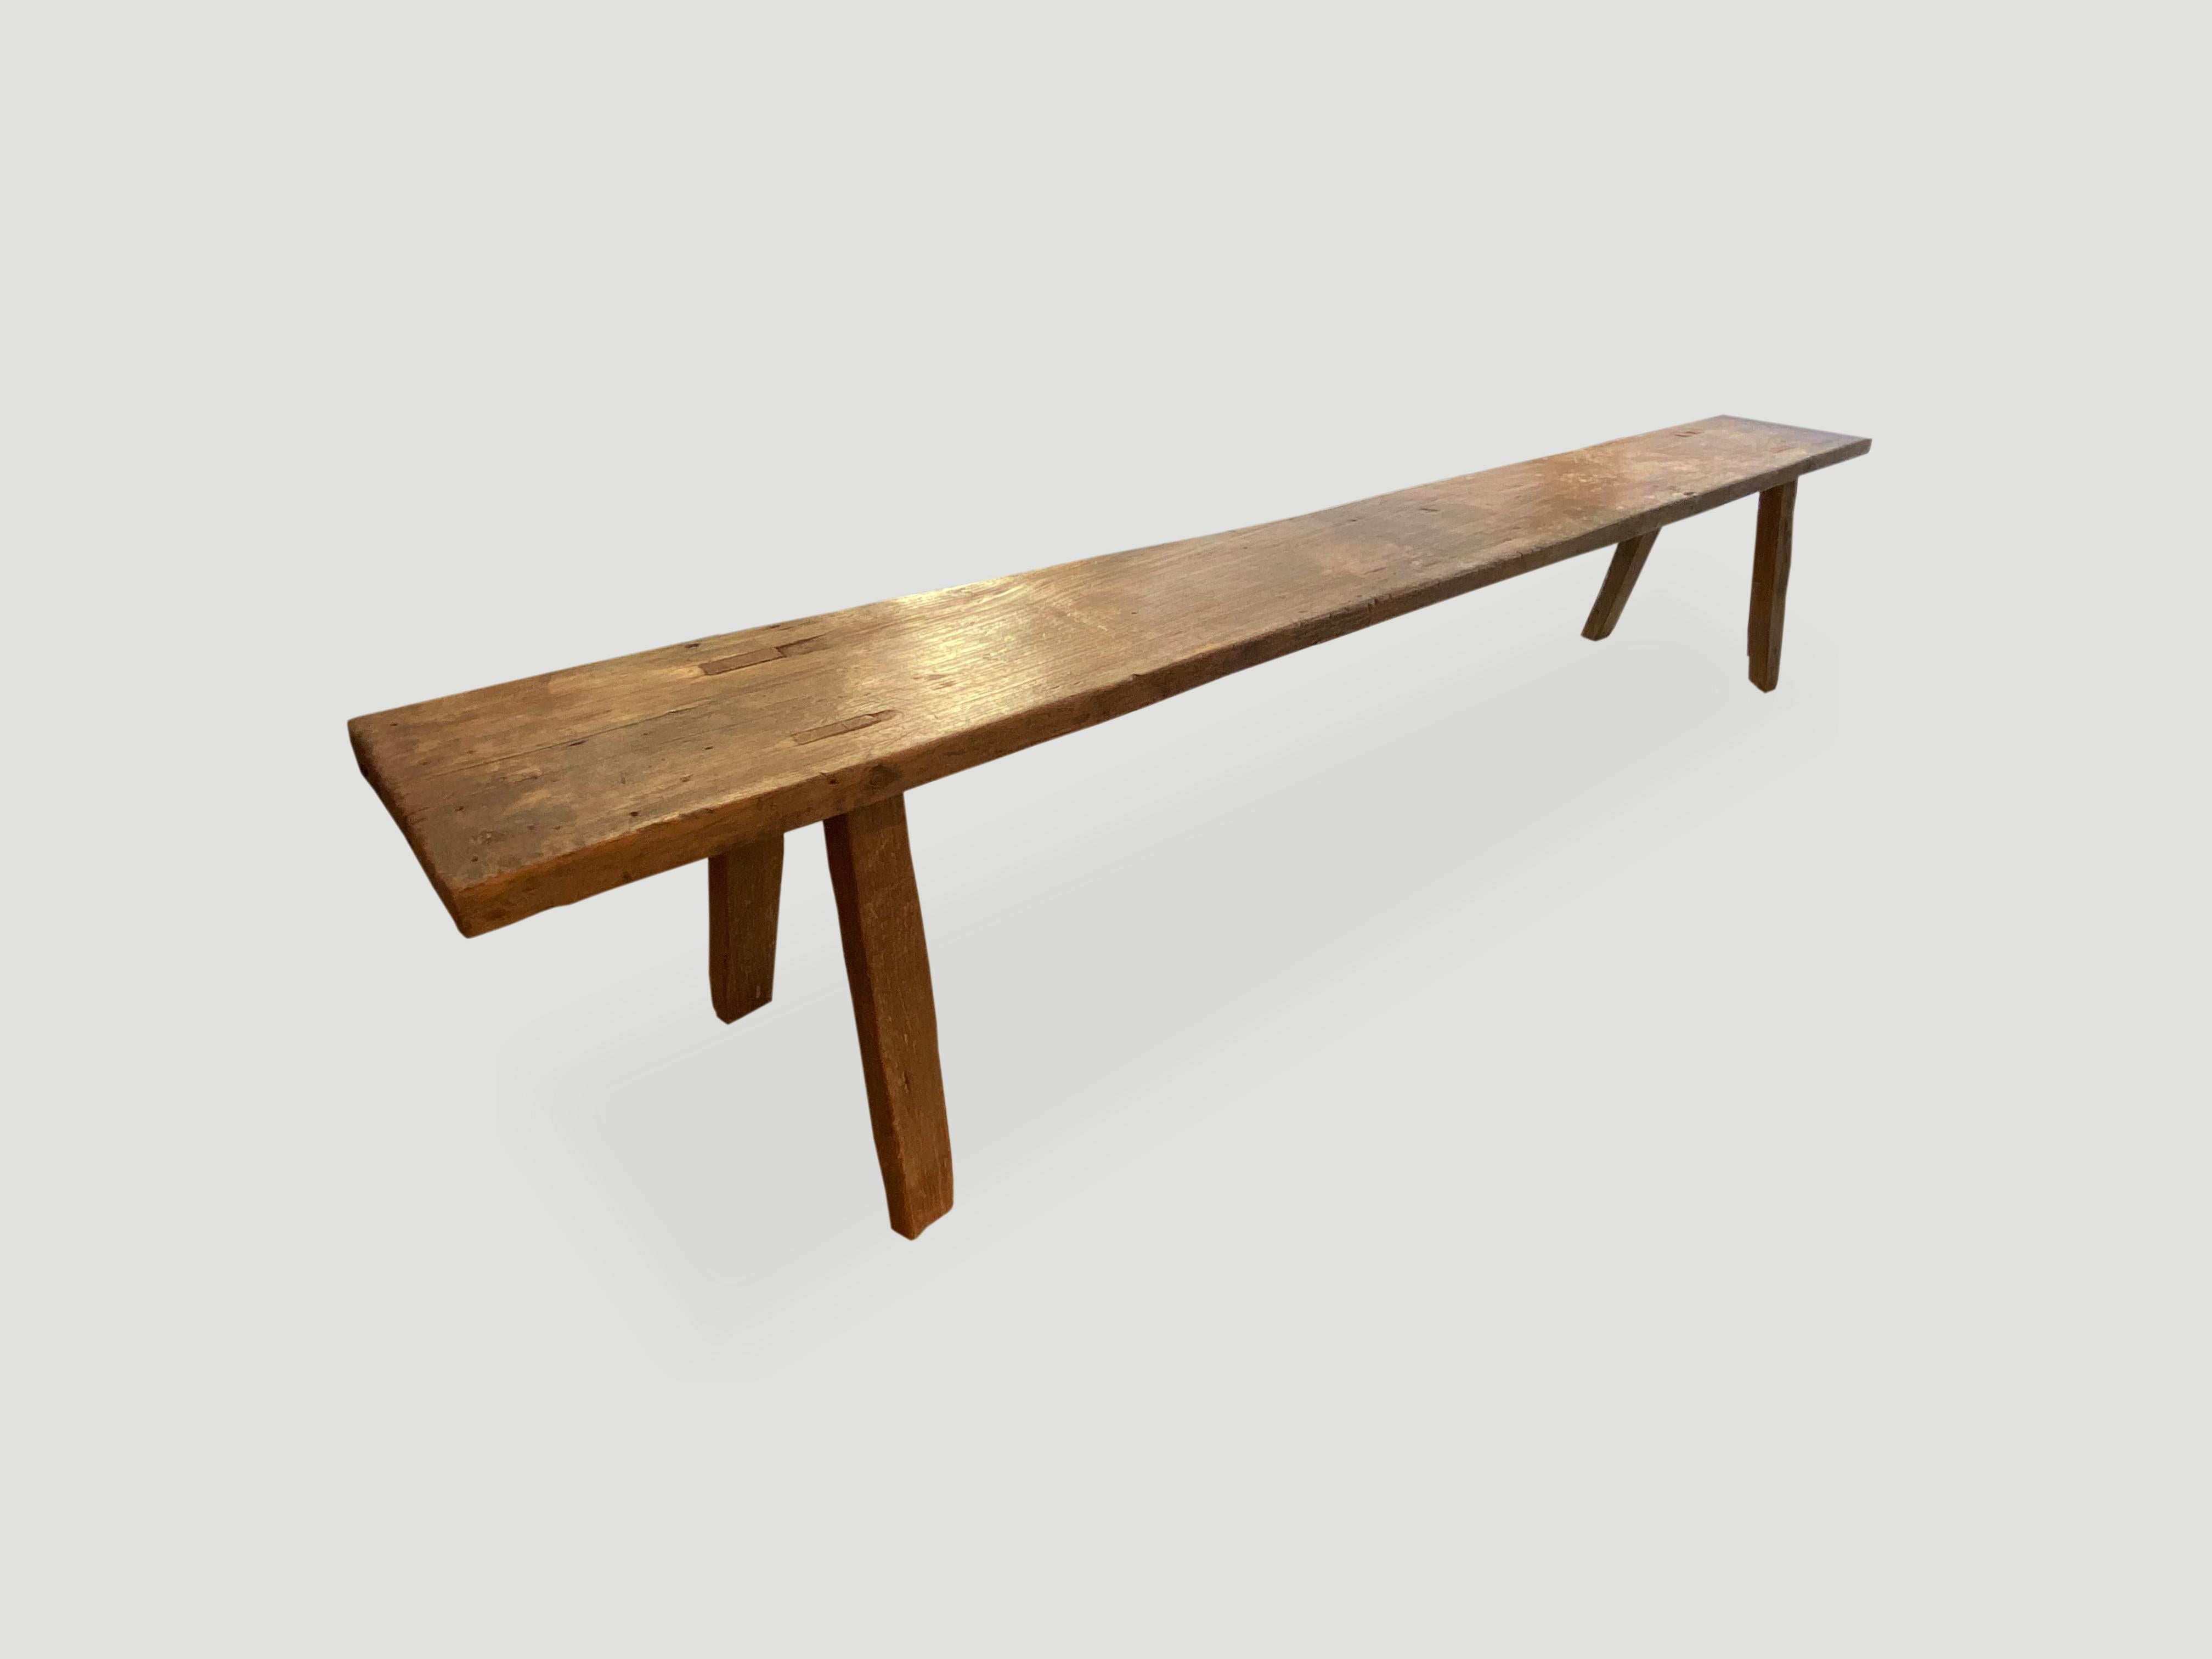 Antique wabi bench made from a single reclaimed teak wood panel. Perfection is imperfection.

This bench was sourced in the spirit of wabi-sabi, a Japanese philosophy that beauty can be found in imperfection and impermanence. It is a beauty of